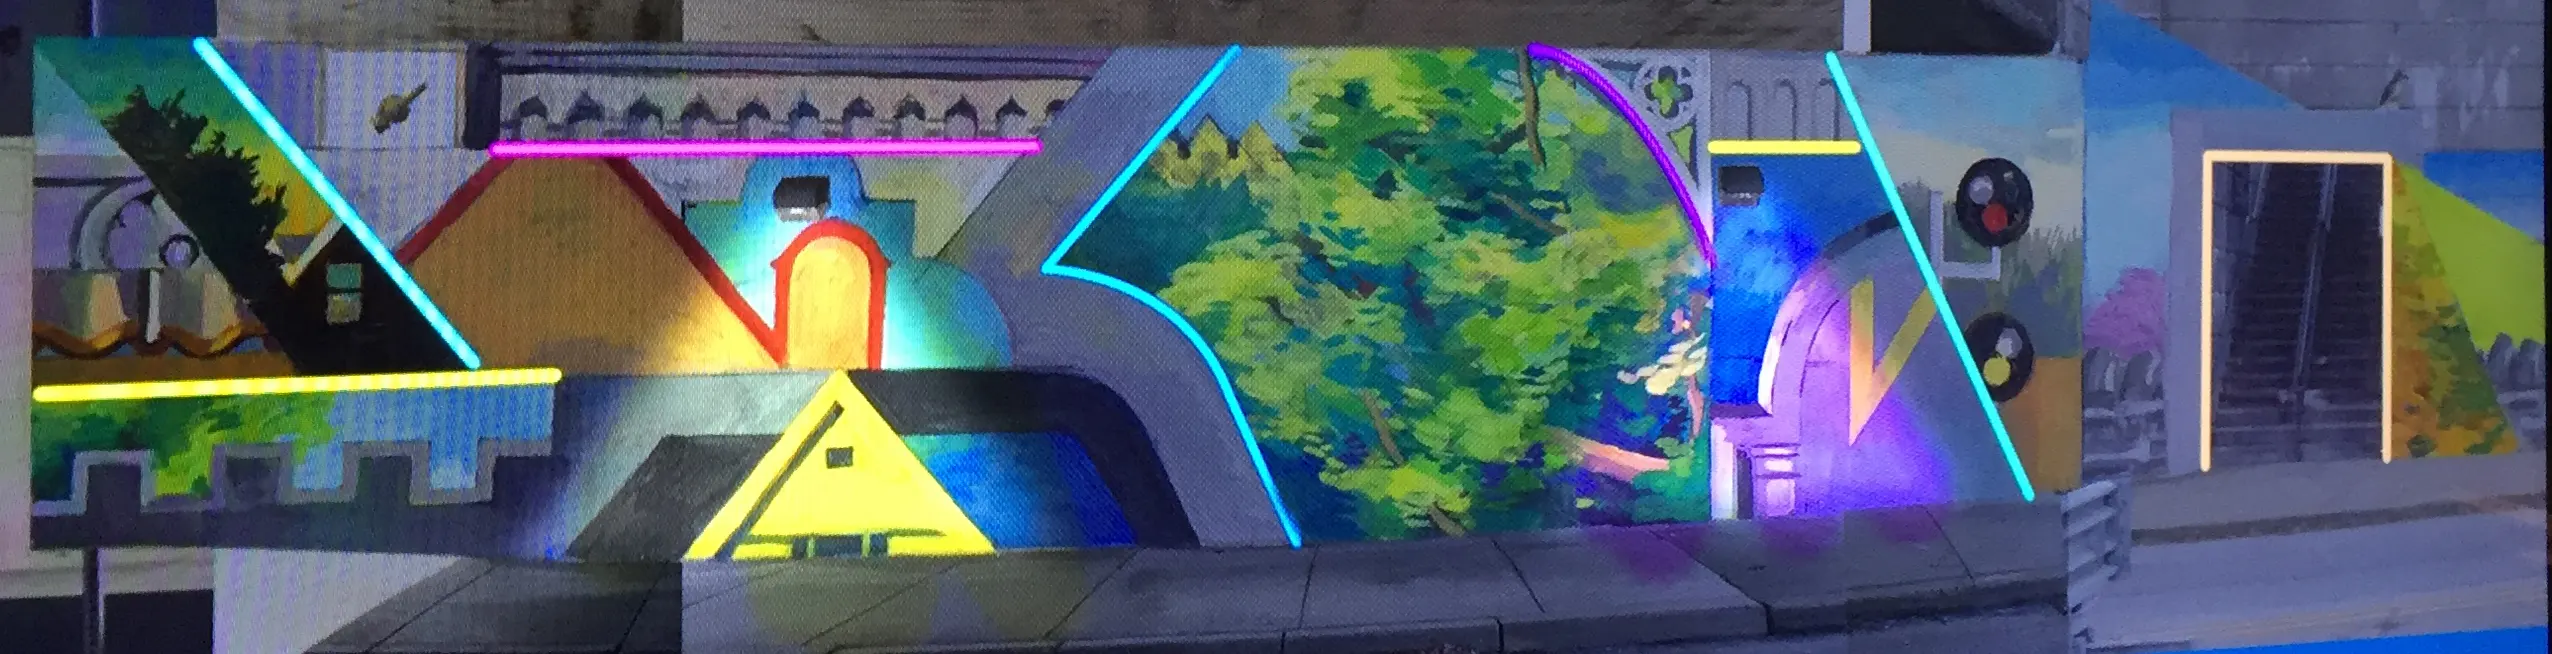 The Glenside Mural is lit up by LED lighting in the evening